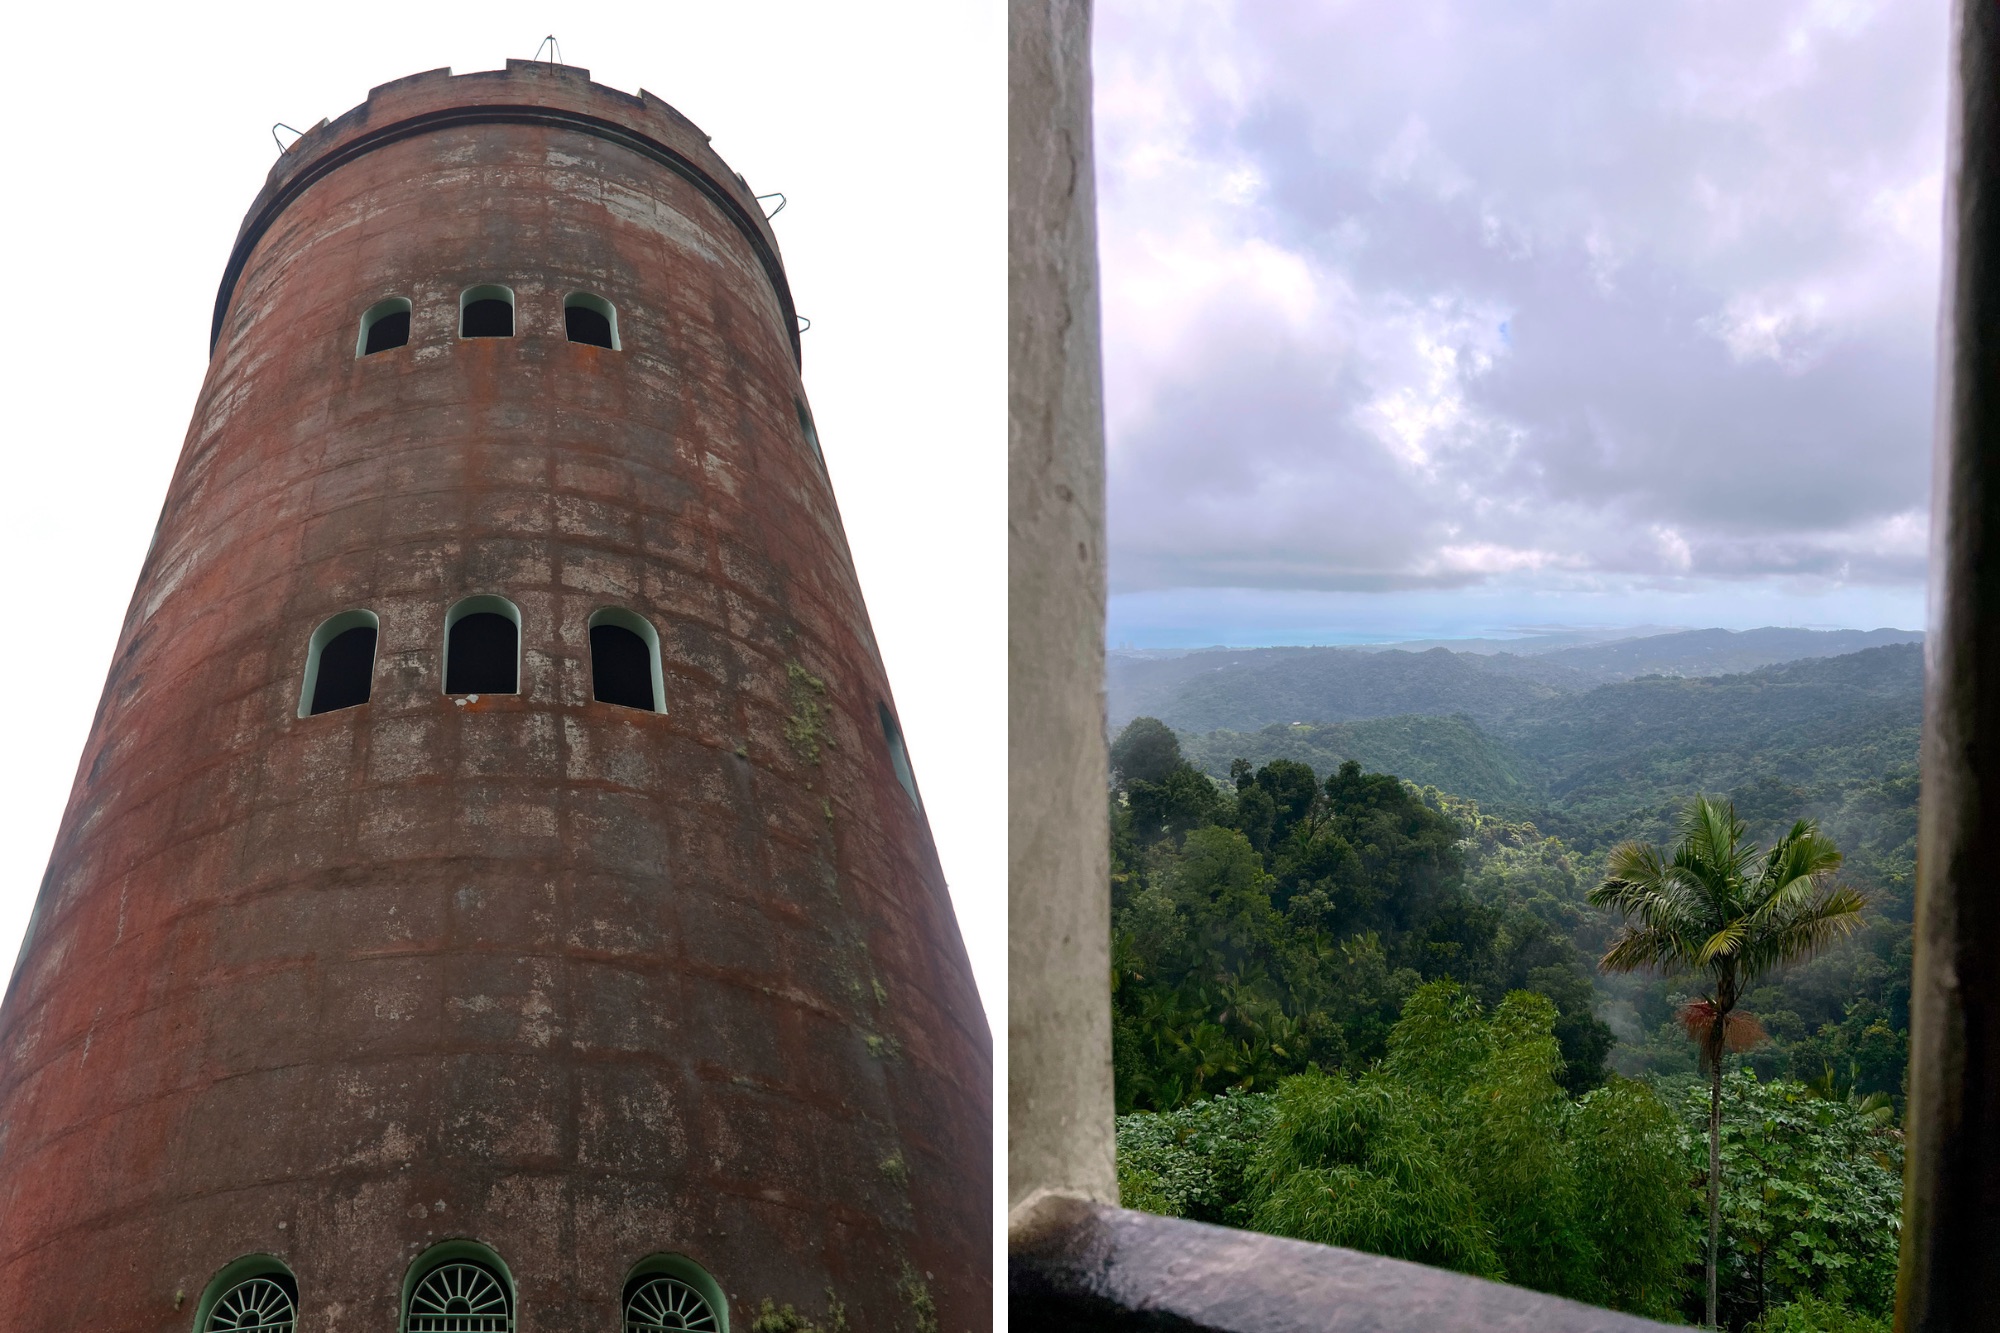 A photo of Yokahu Tower and the view from the top